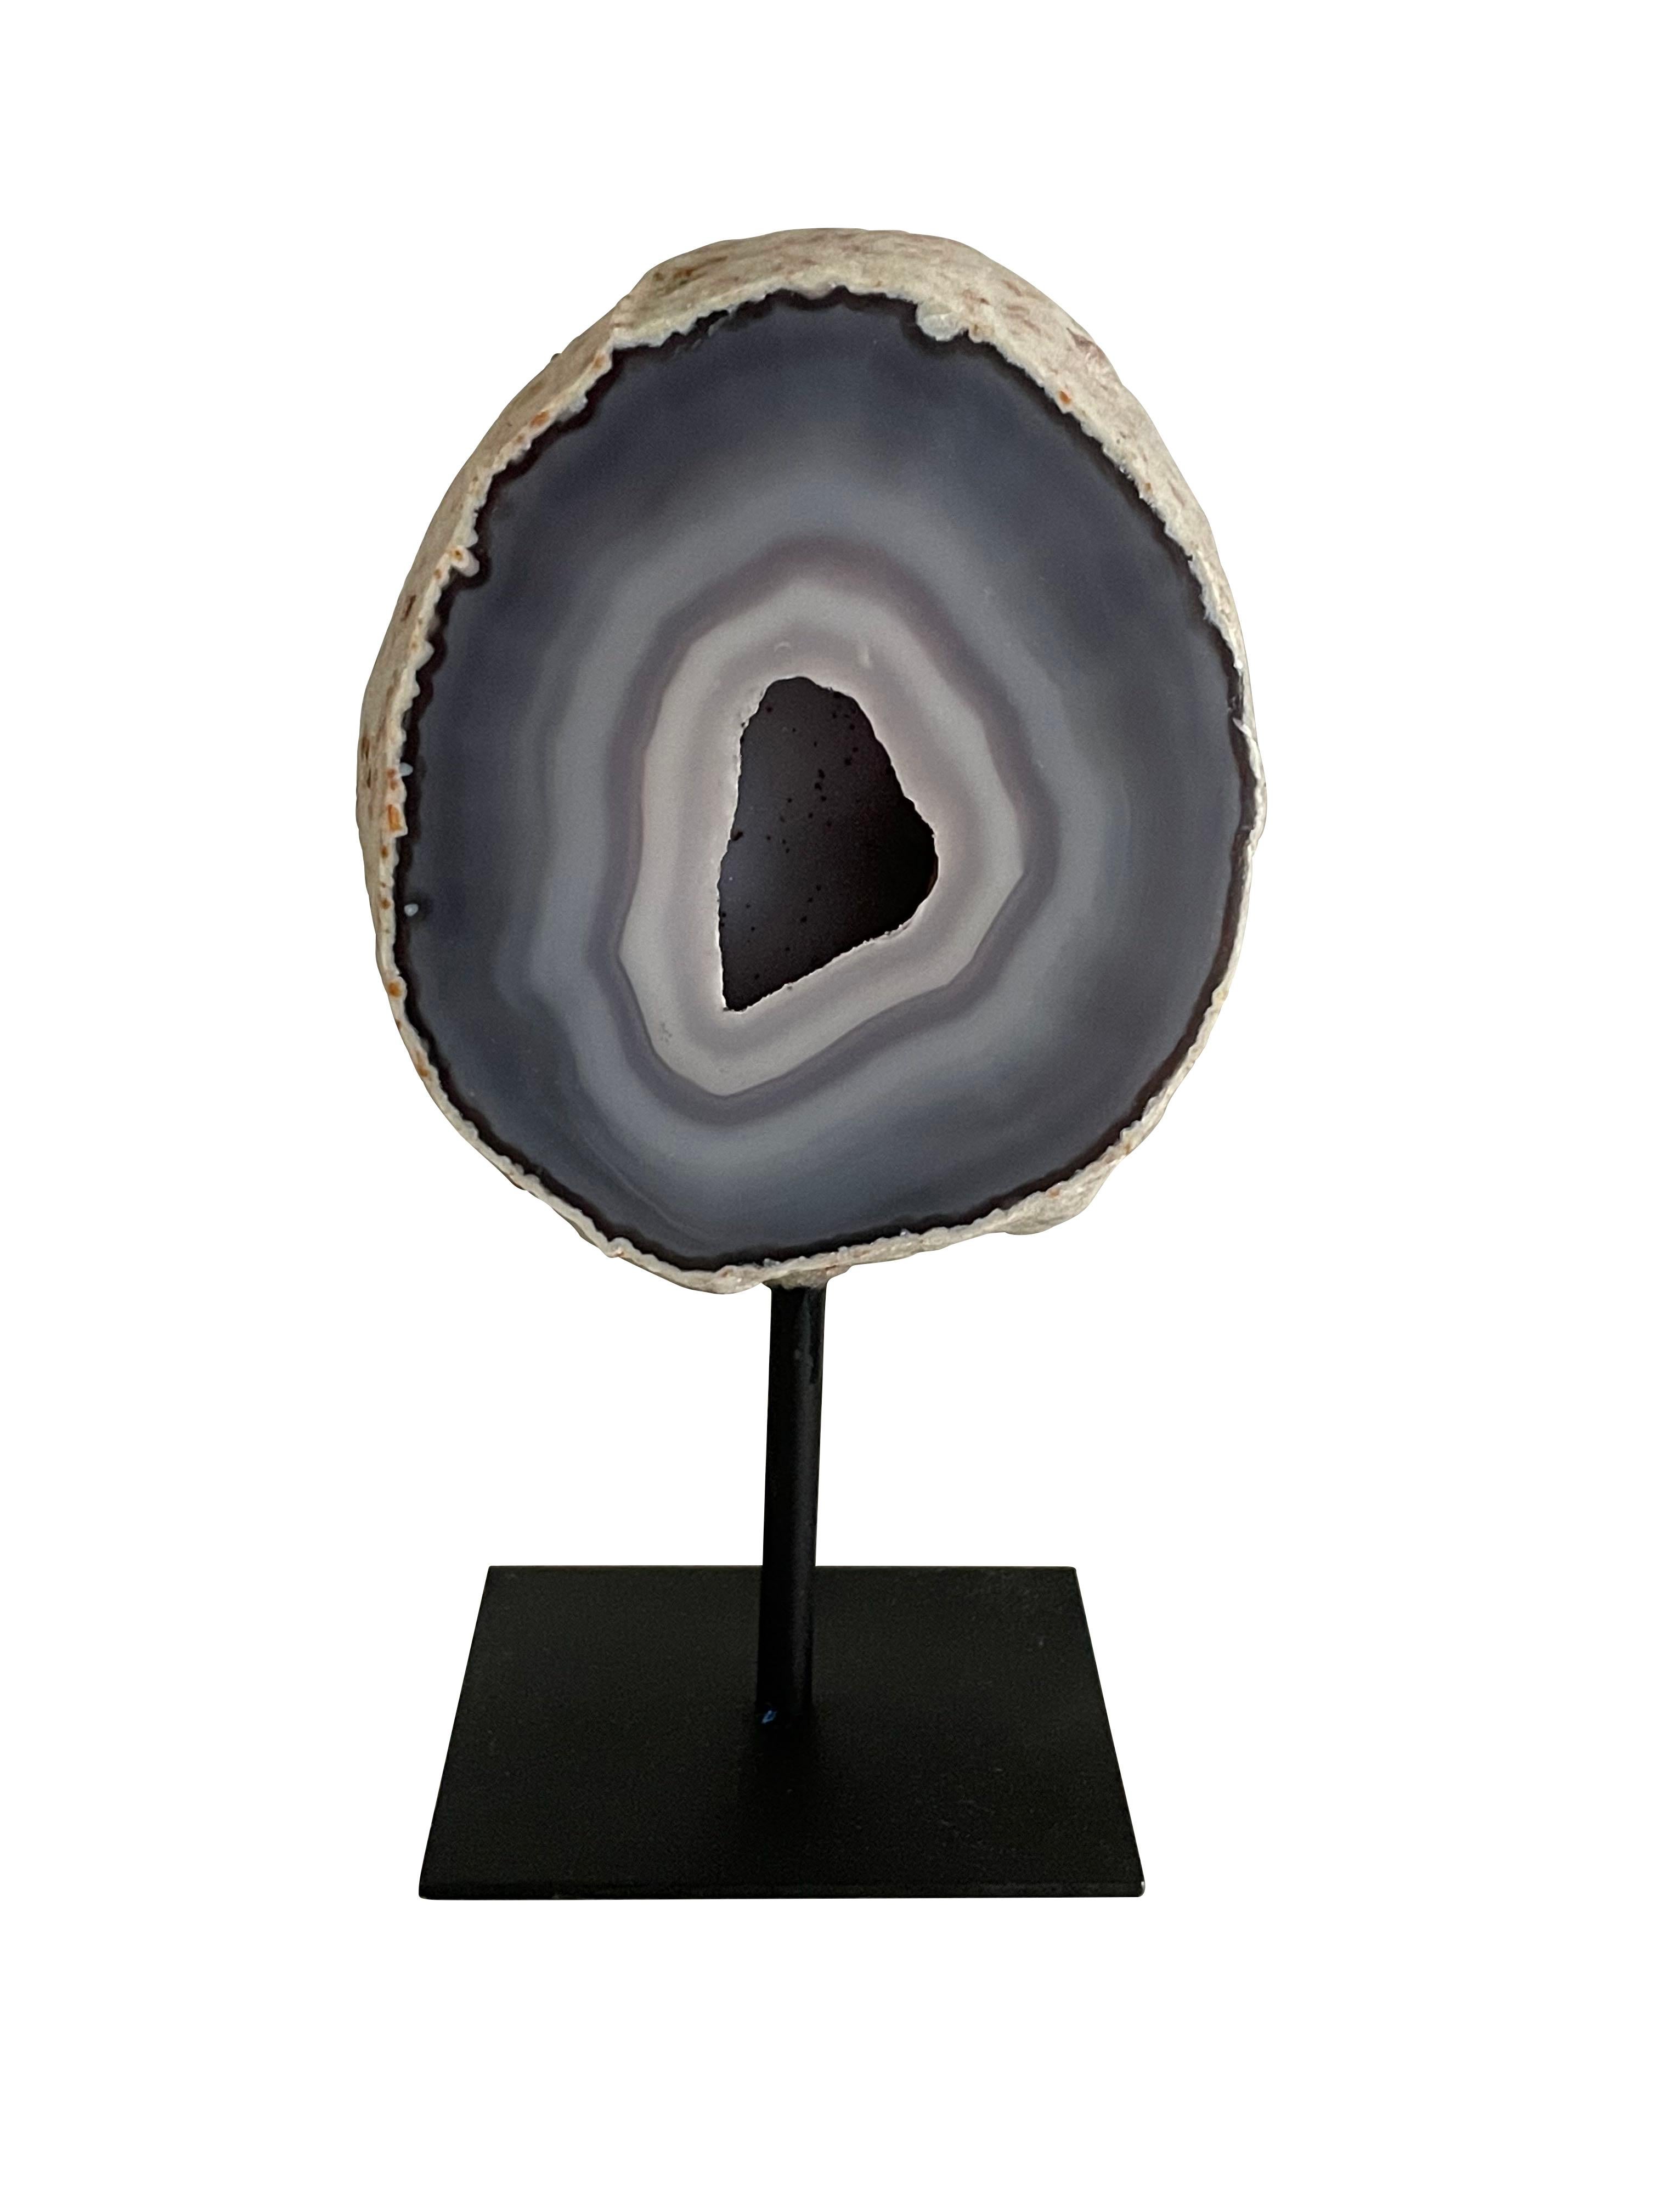 Grey Brazilian thick slice of agate mounted on a steel stand.
Agate is a banded form of finely-grained, microcrystalline Quartz. 
The lovely color patterns and banding make this translucent gemstone very unique. 
Agates can have many distinctive